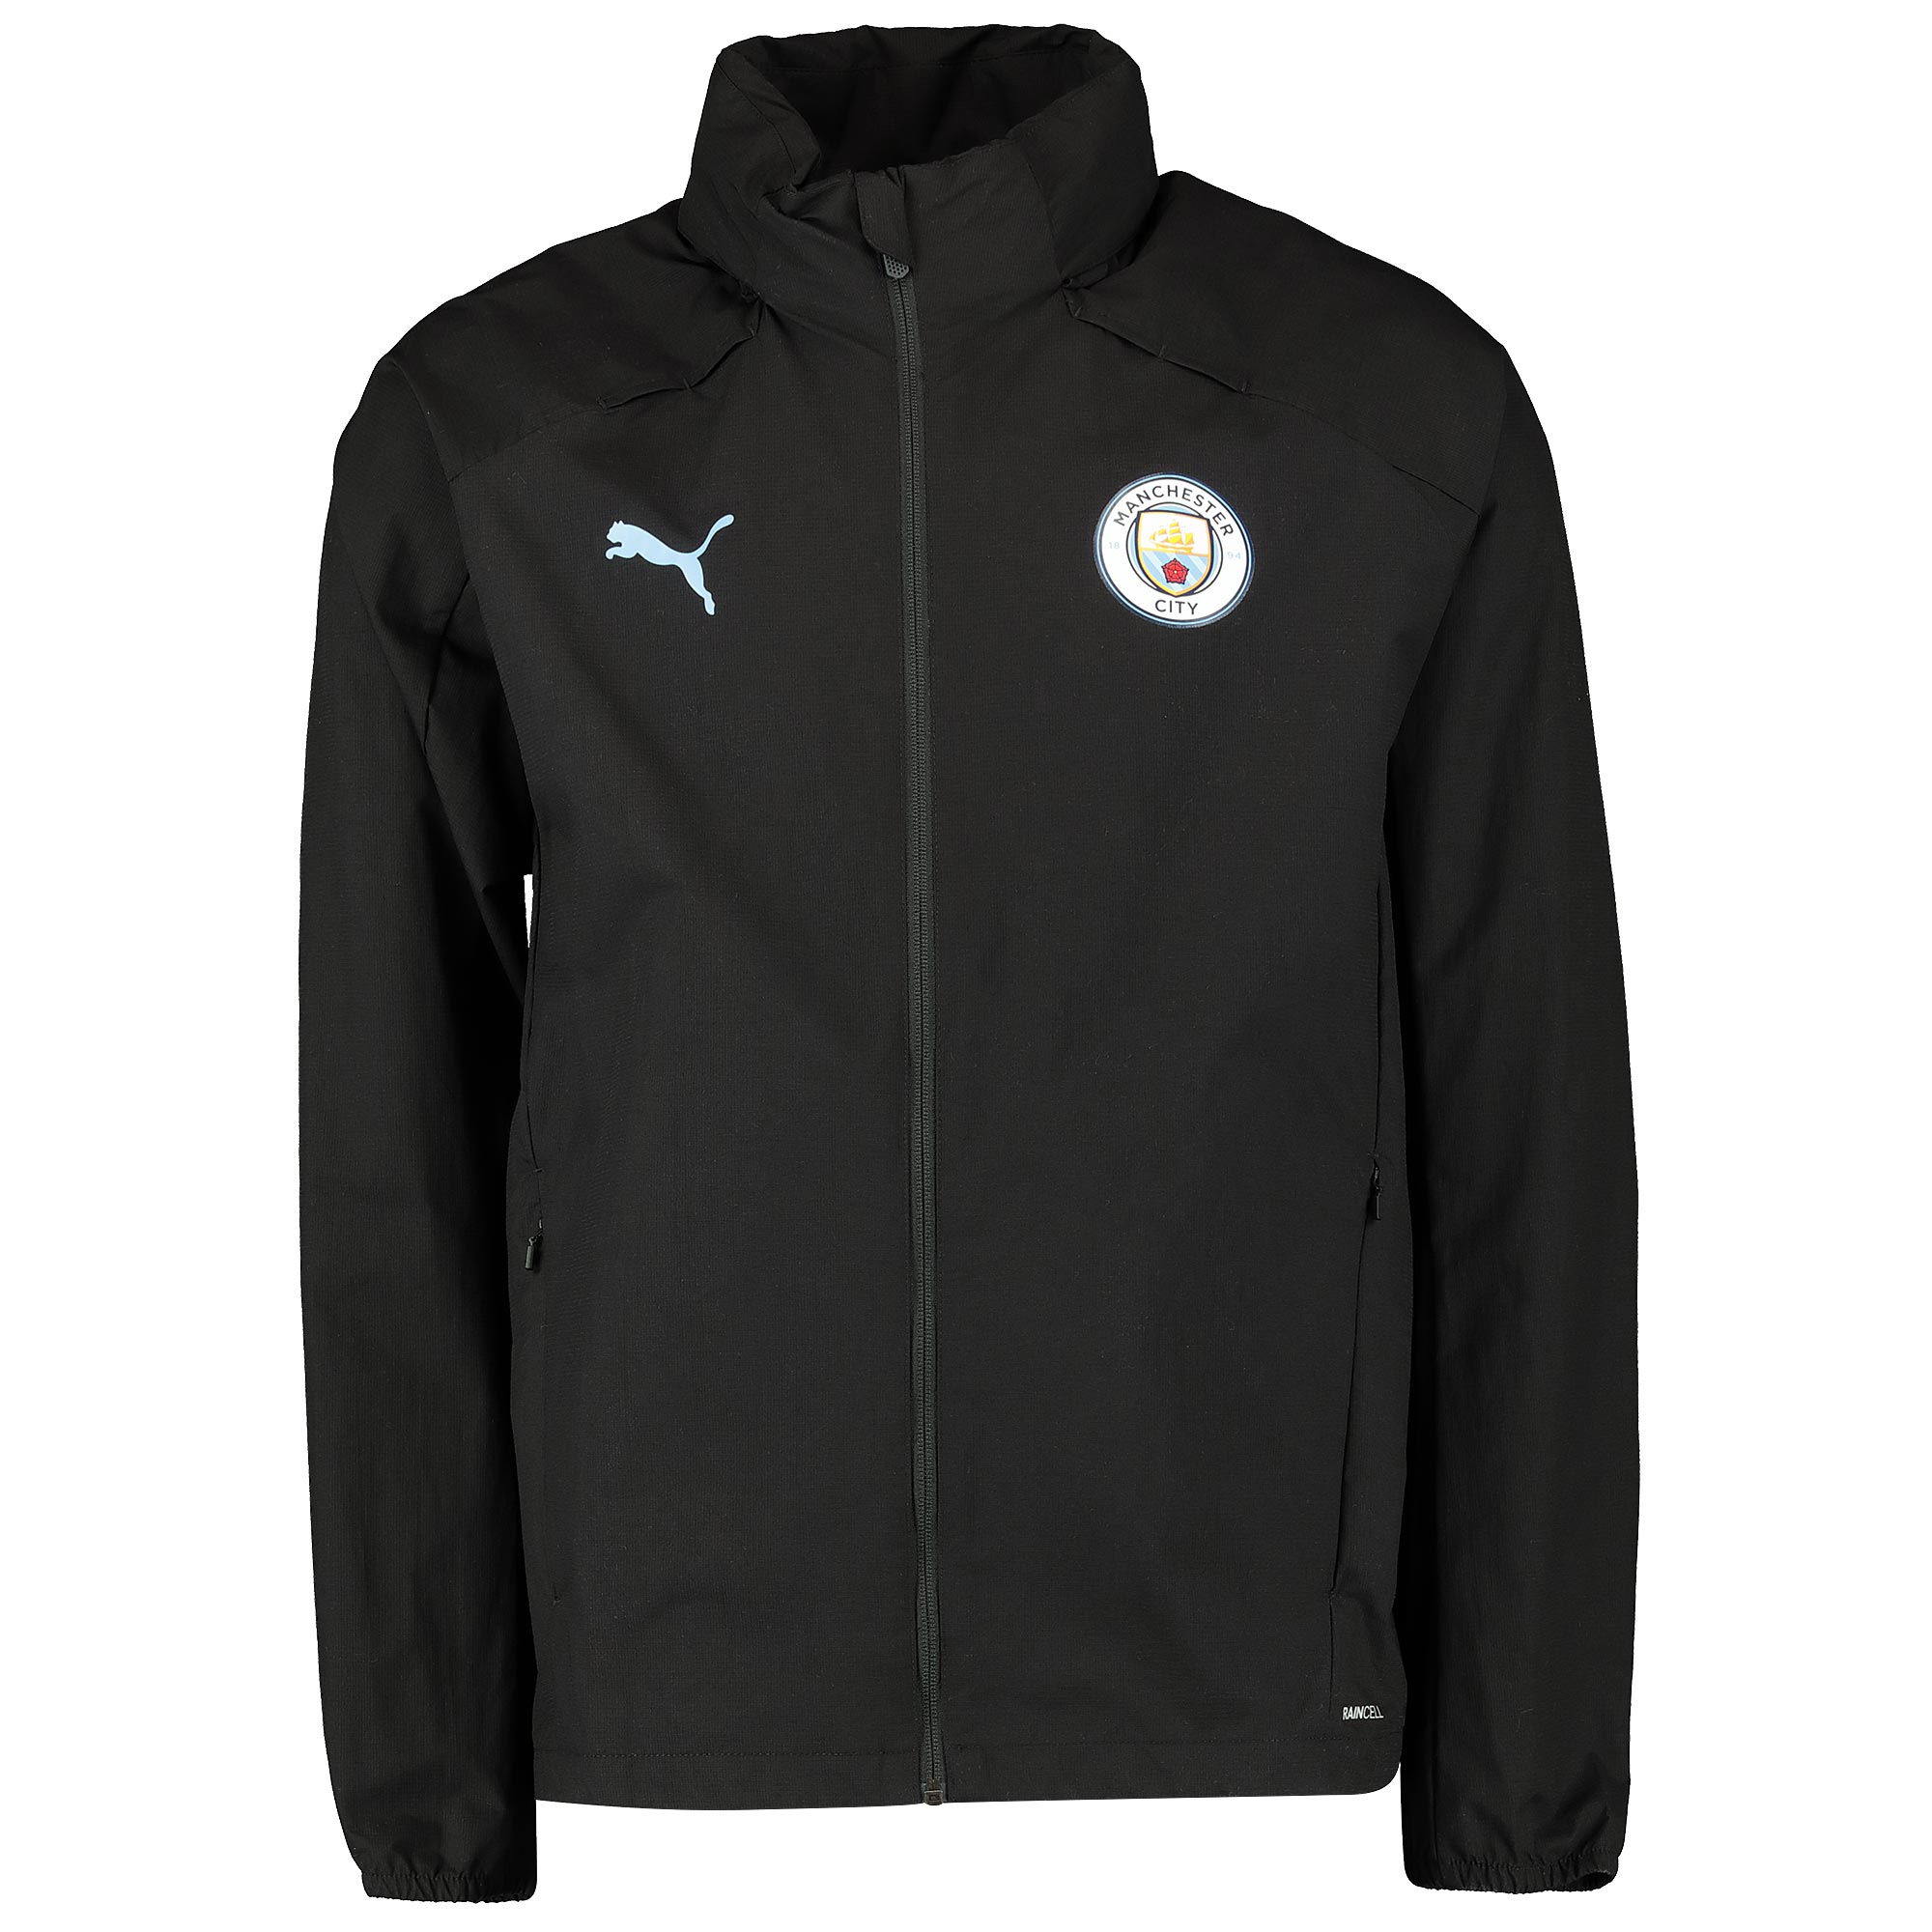 Manchester City Jackets For Sale : Nike Manchester City 2018/19 Dry ...